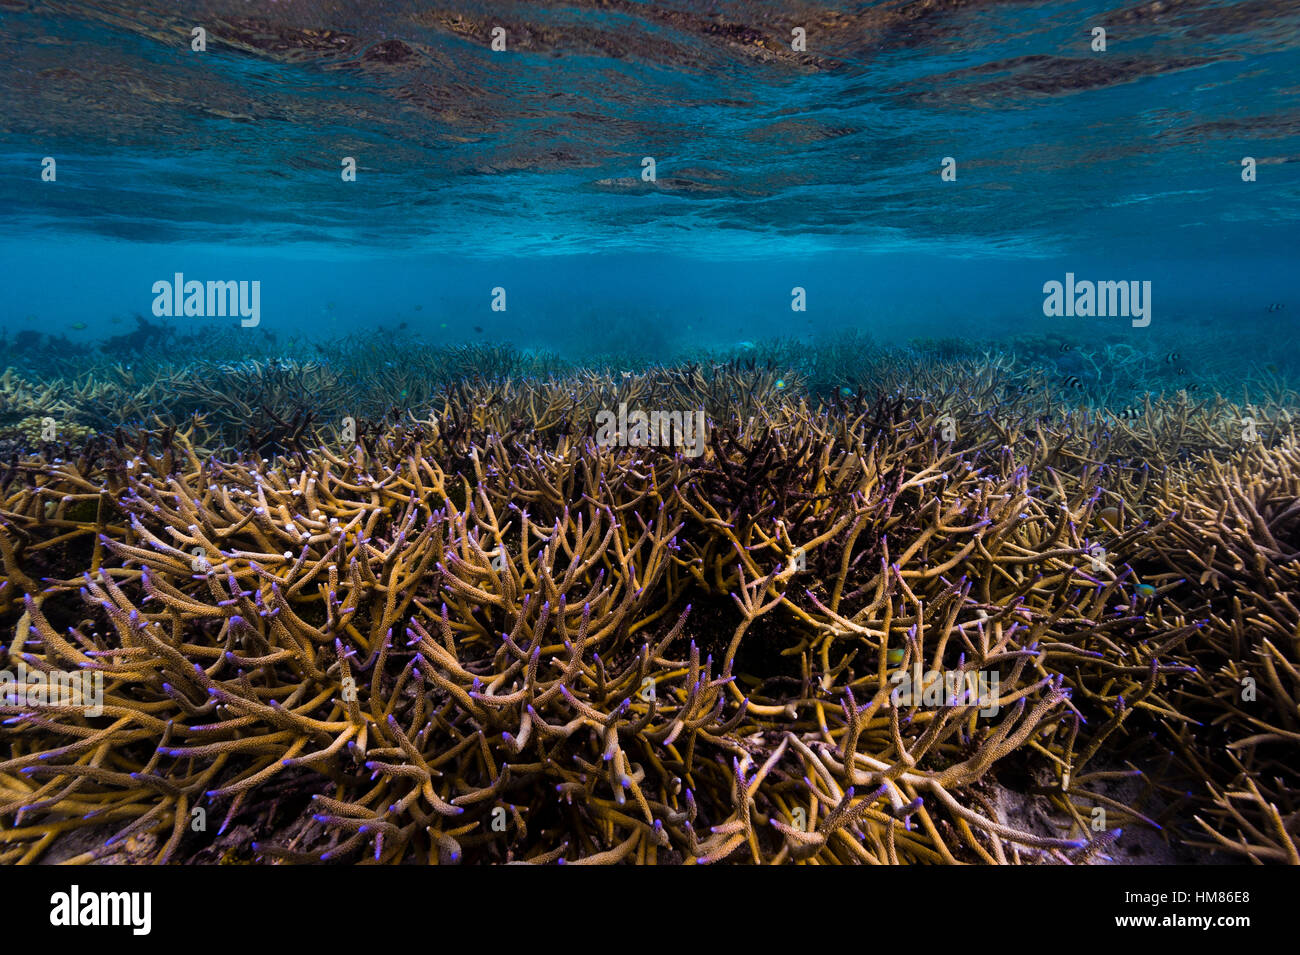 A pristine forest of Staghorn coral with bright purple tips in the  shallow waters of a tropical sea. Stock Photo